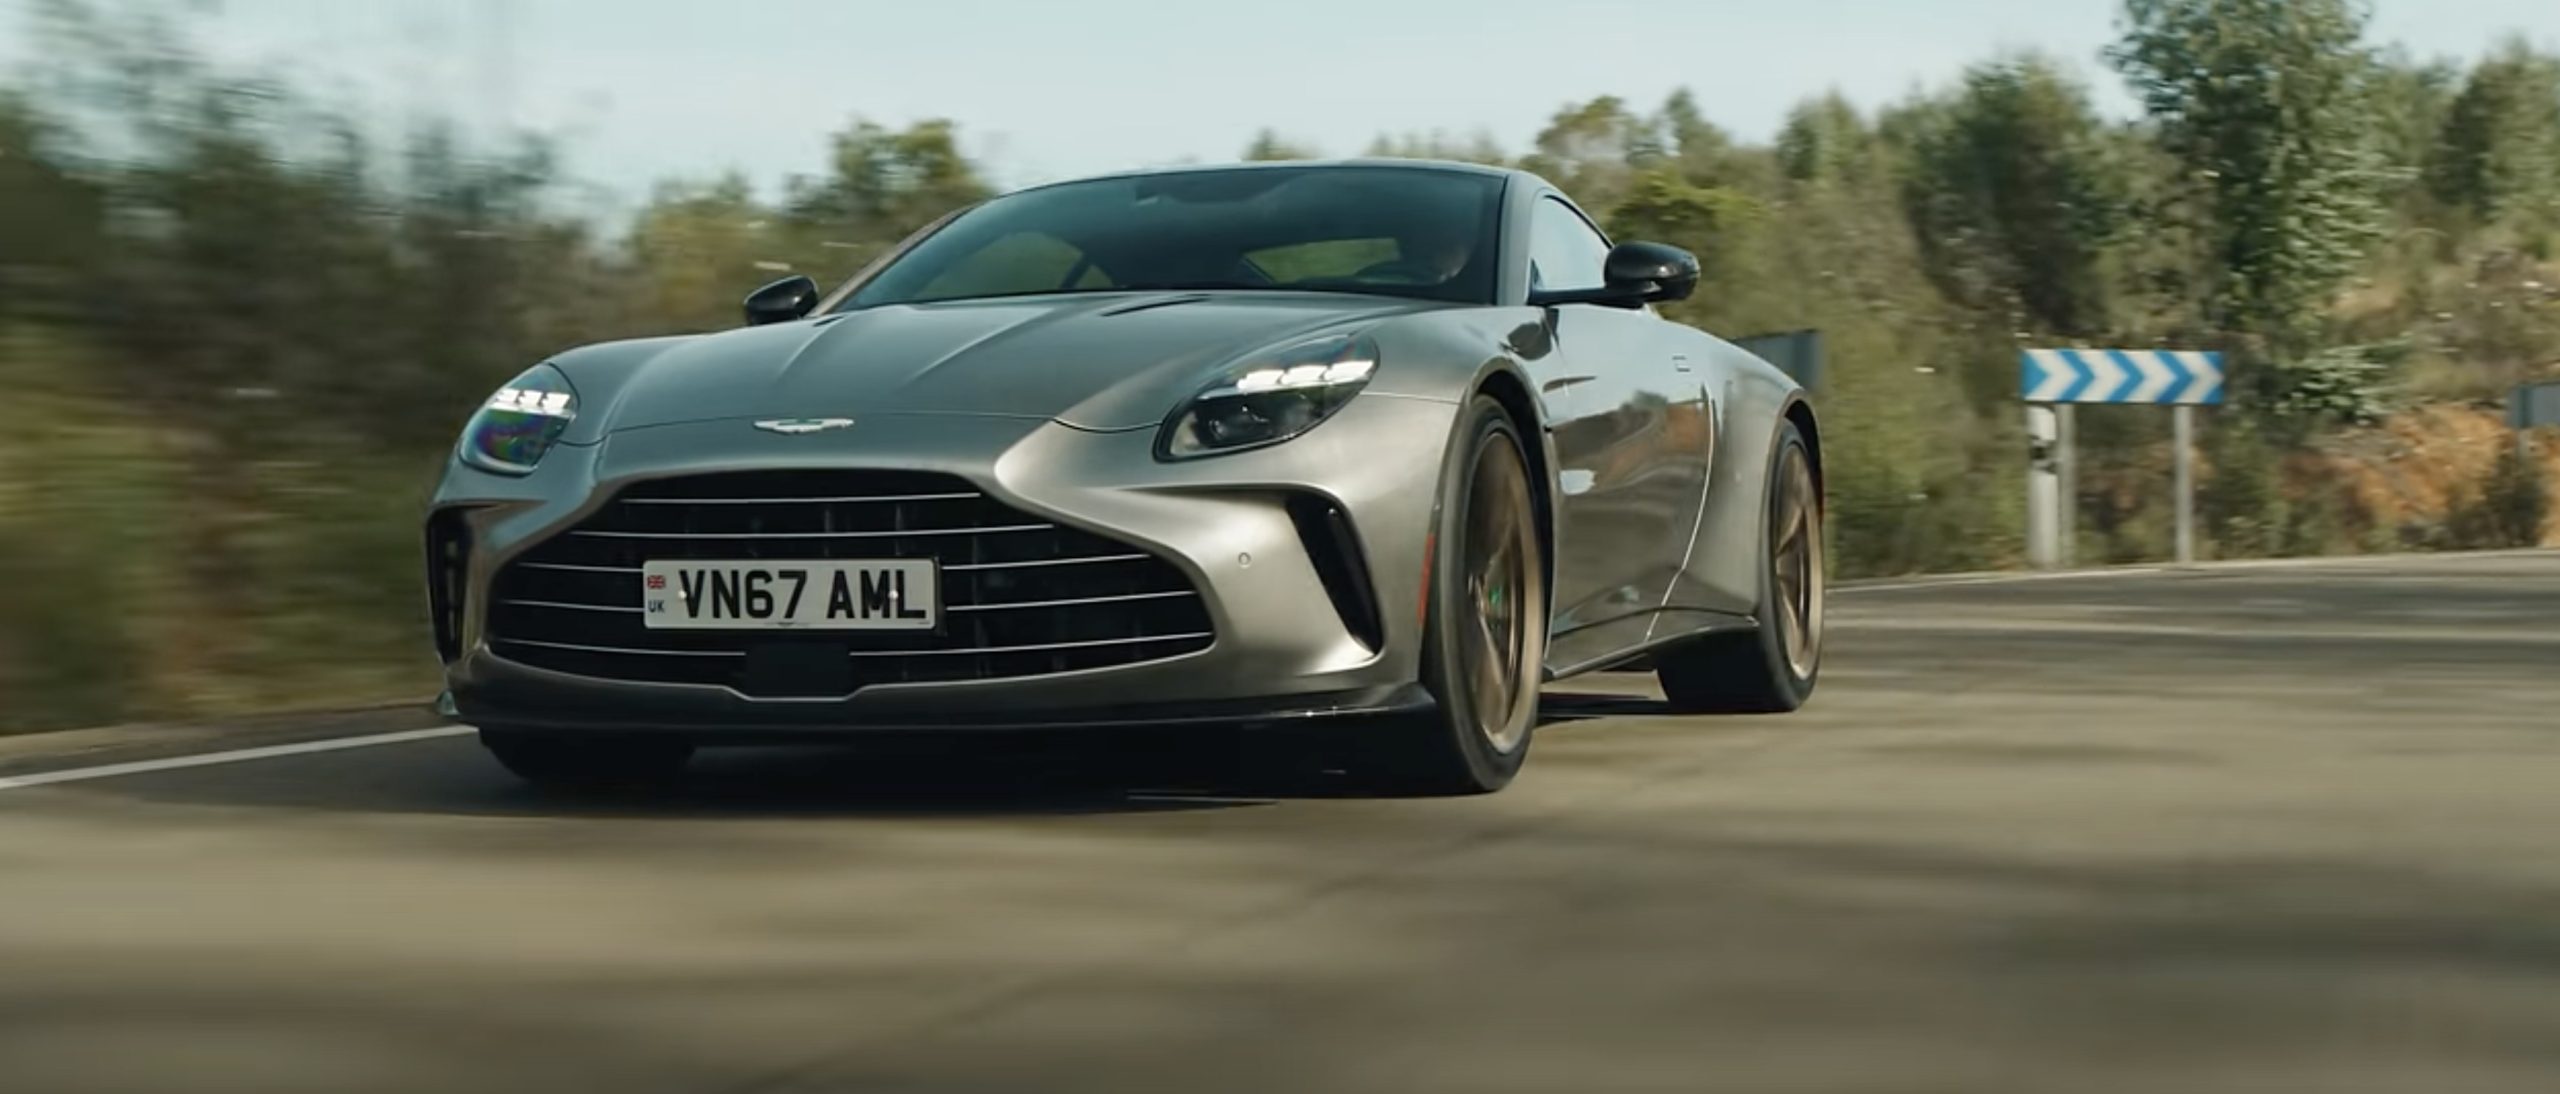 The Driver's Seat: Henry Catchpole on the New Aston Martin Vantage